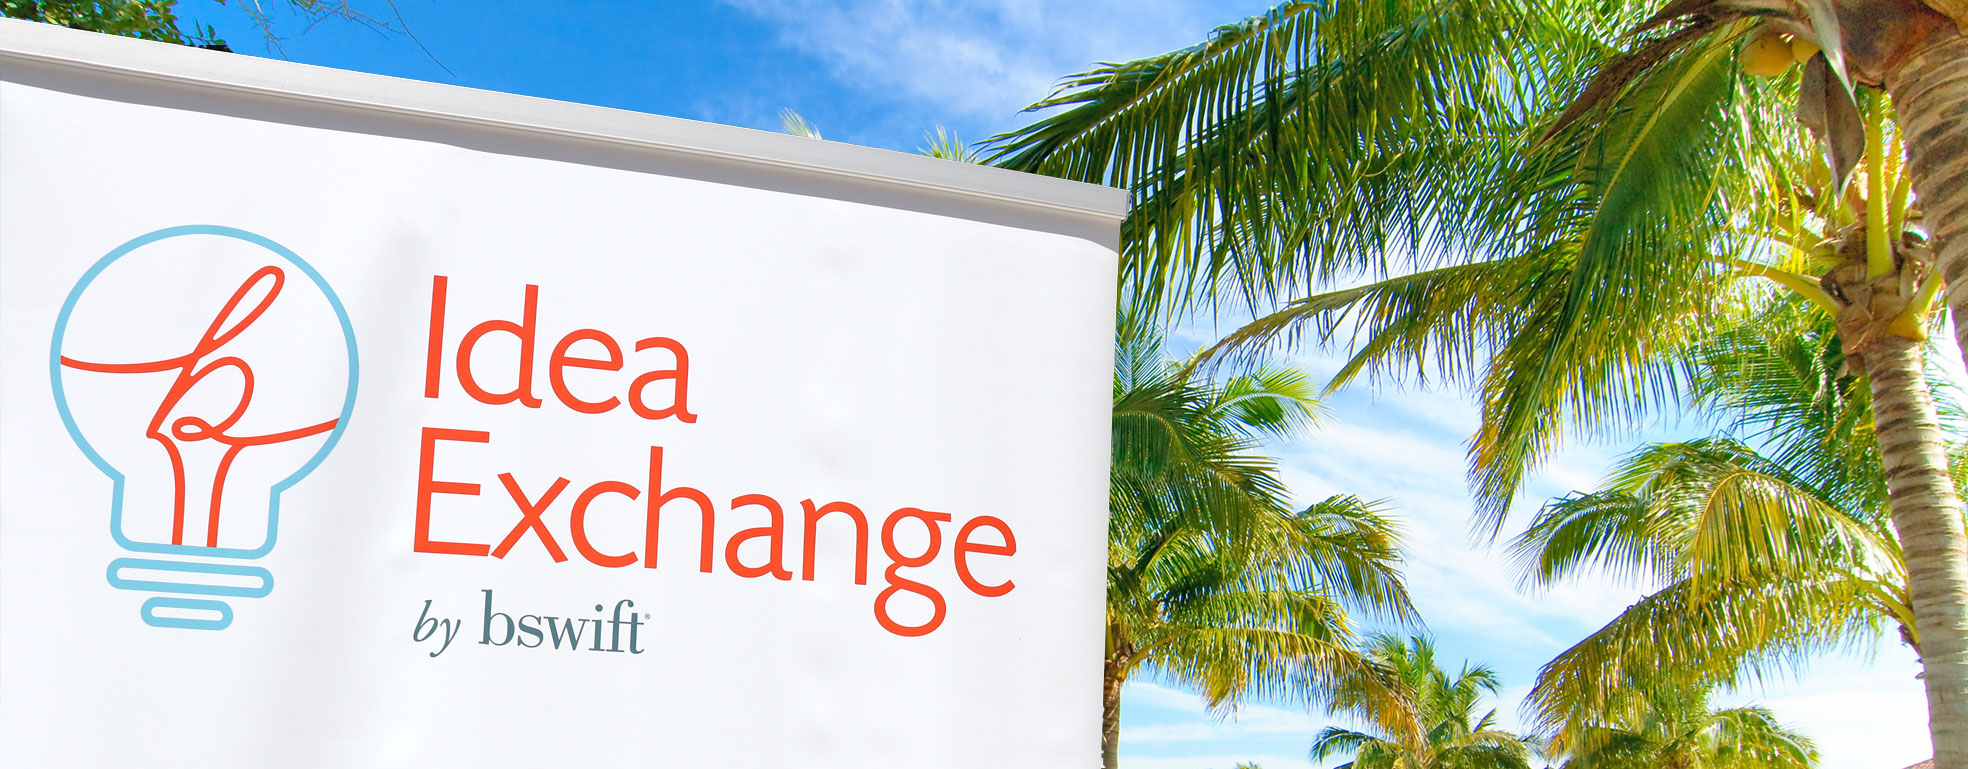 Idea Exchange banner with palm trees in background